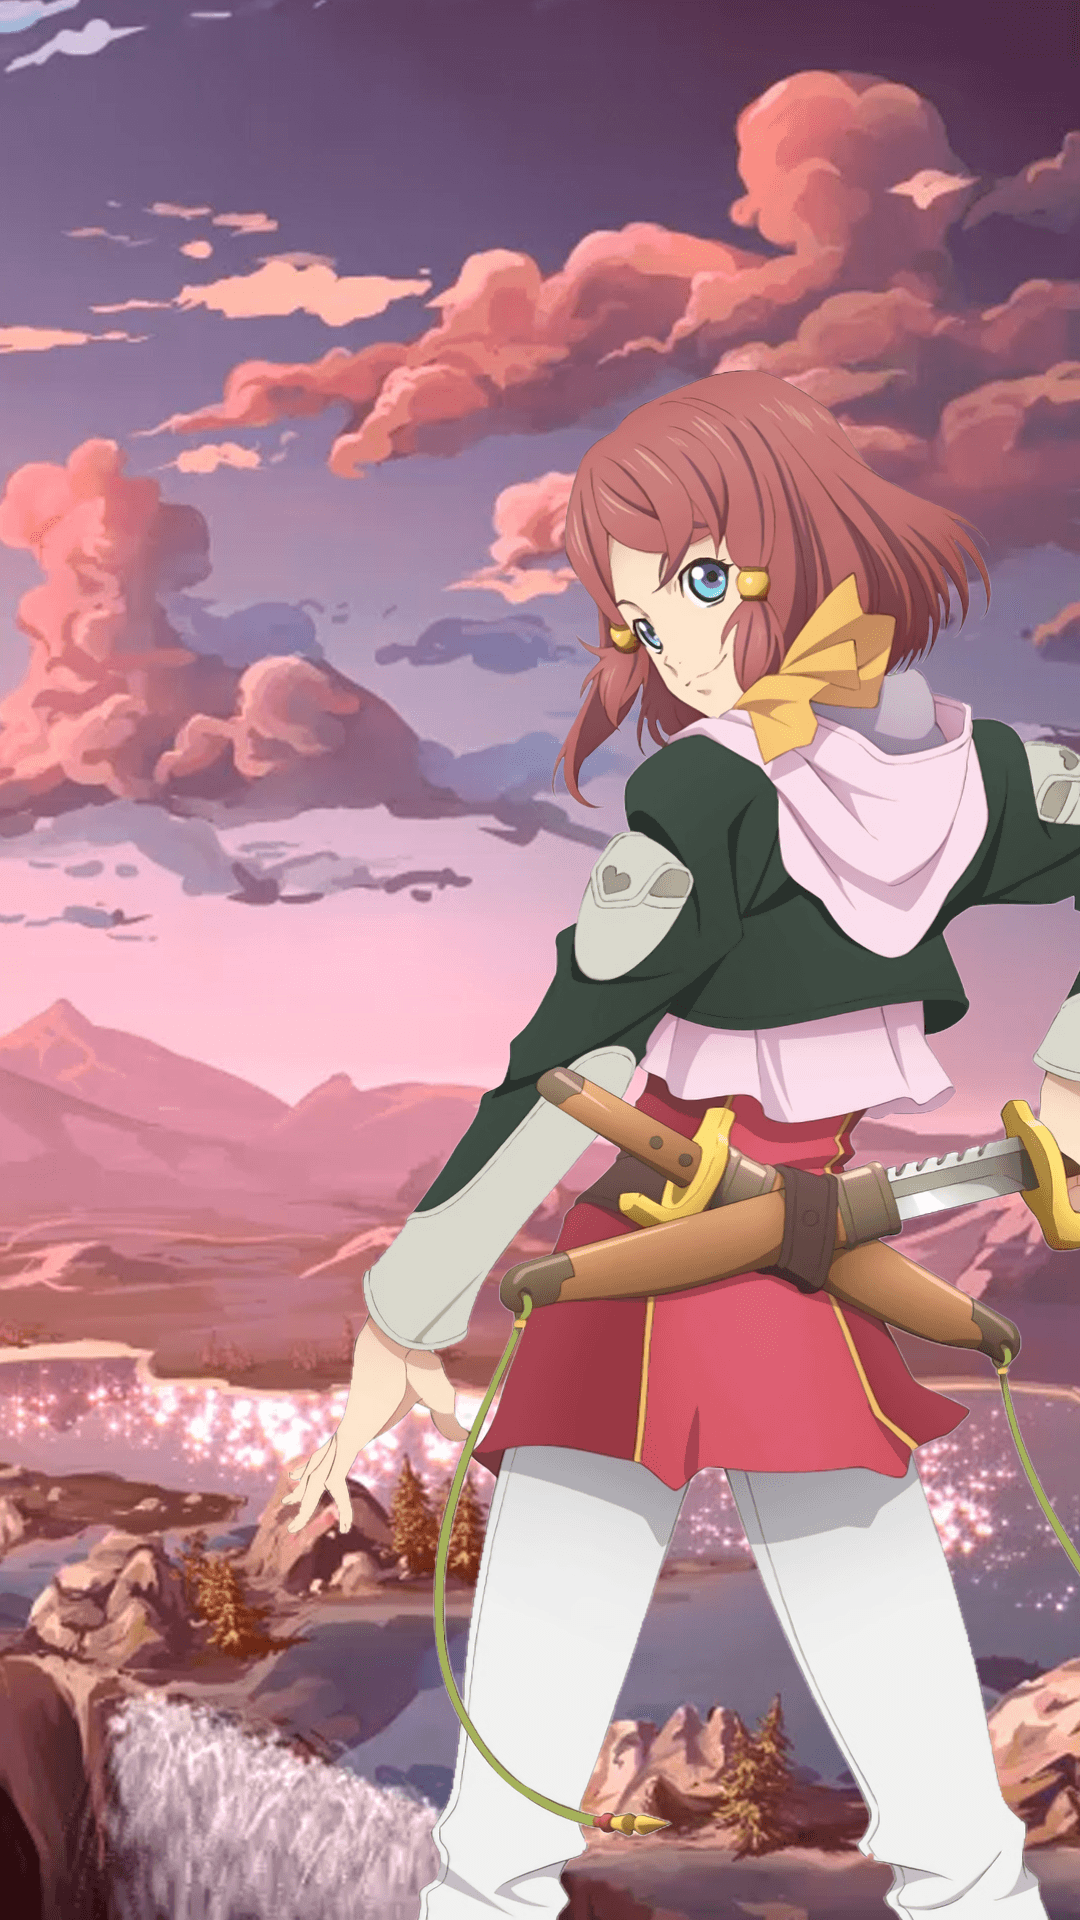 Phone wallpaper of Rose from Tales of Zestiria 1080x1920